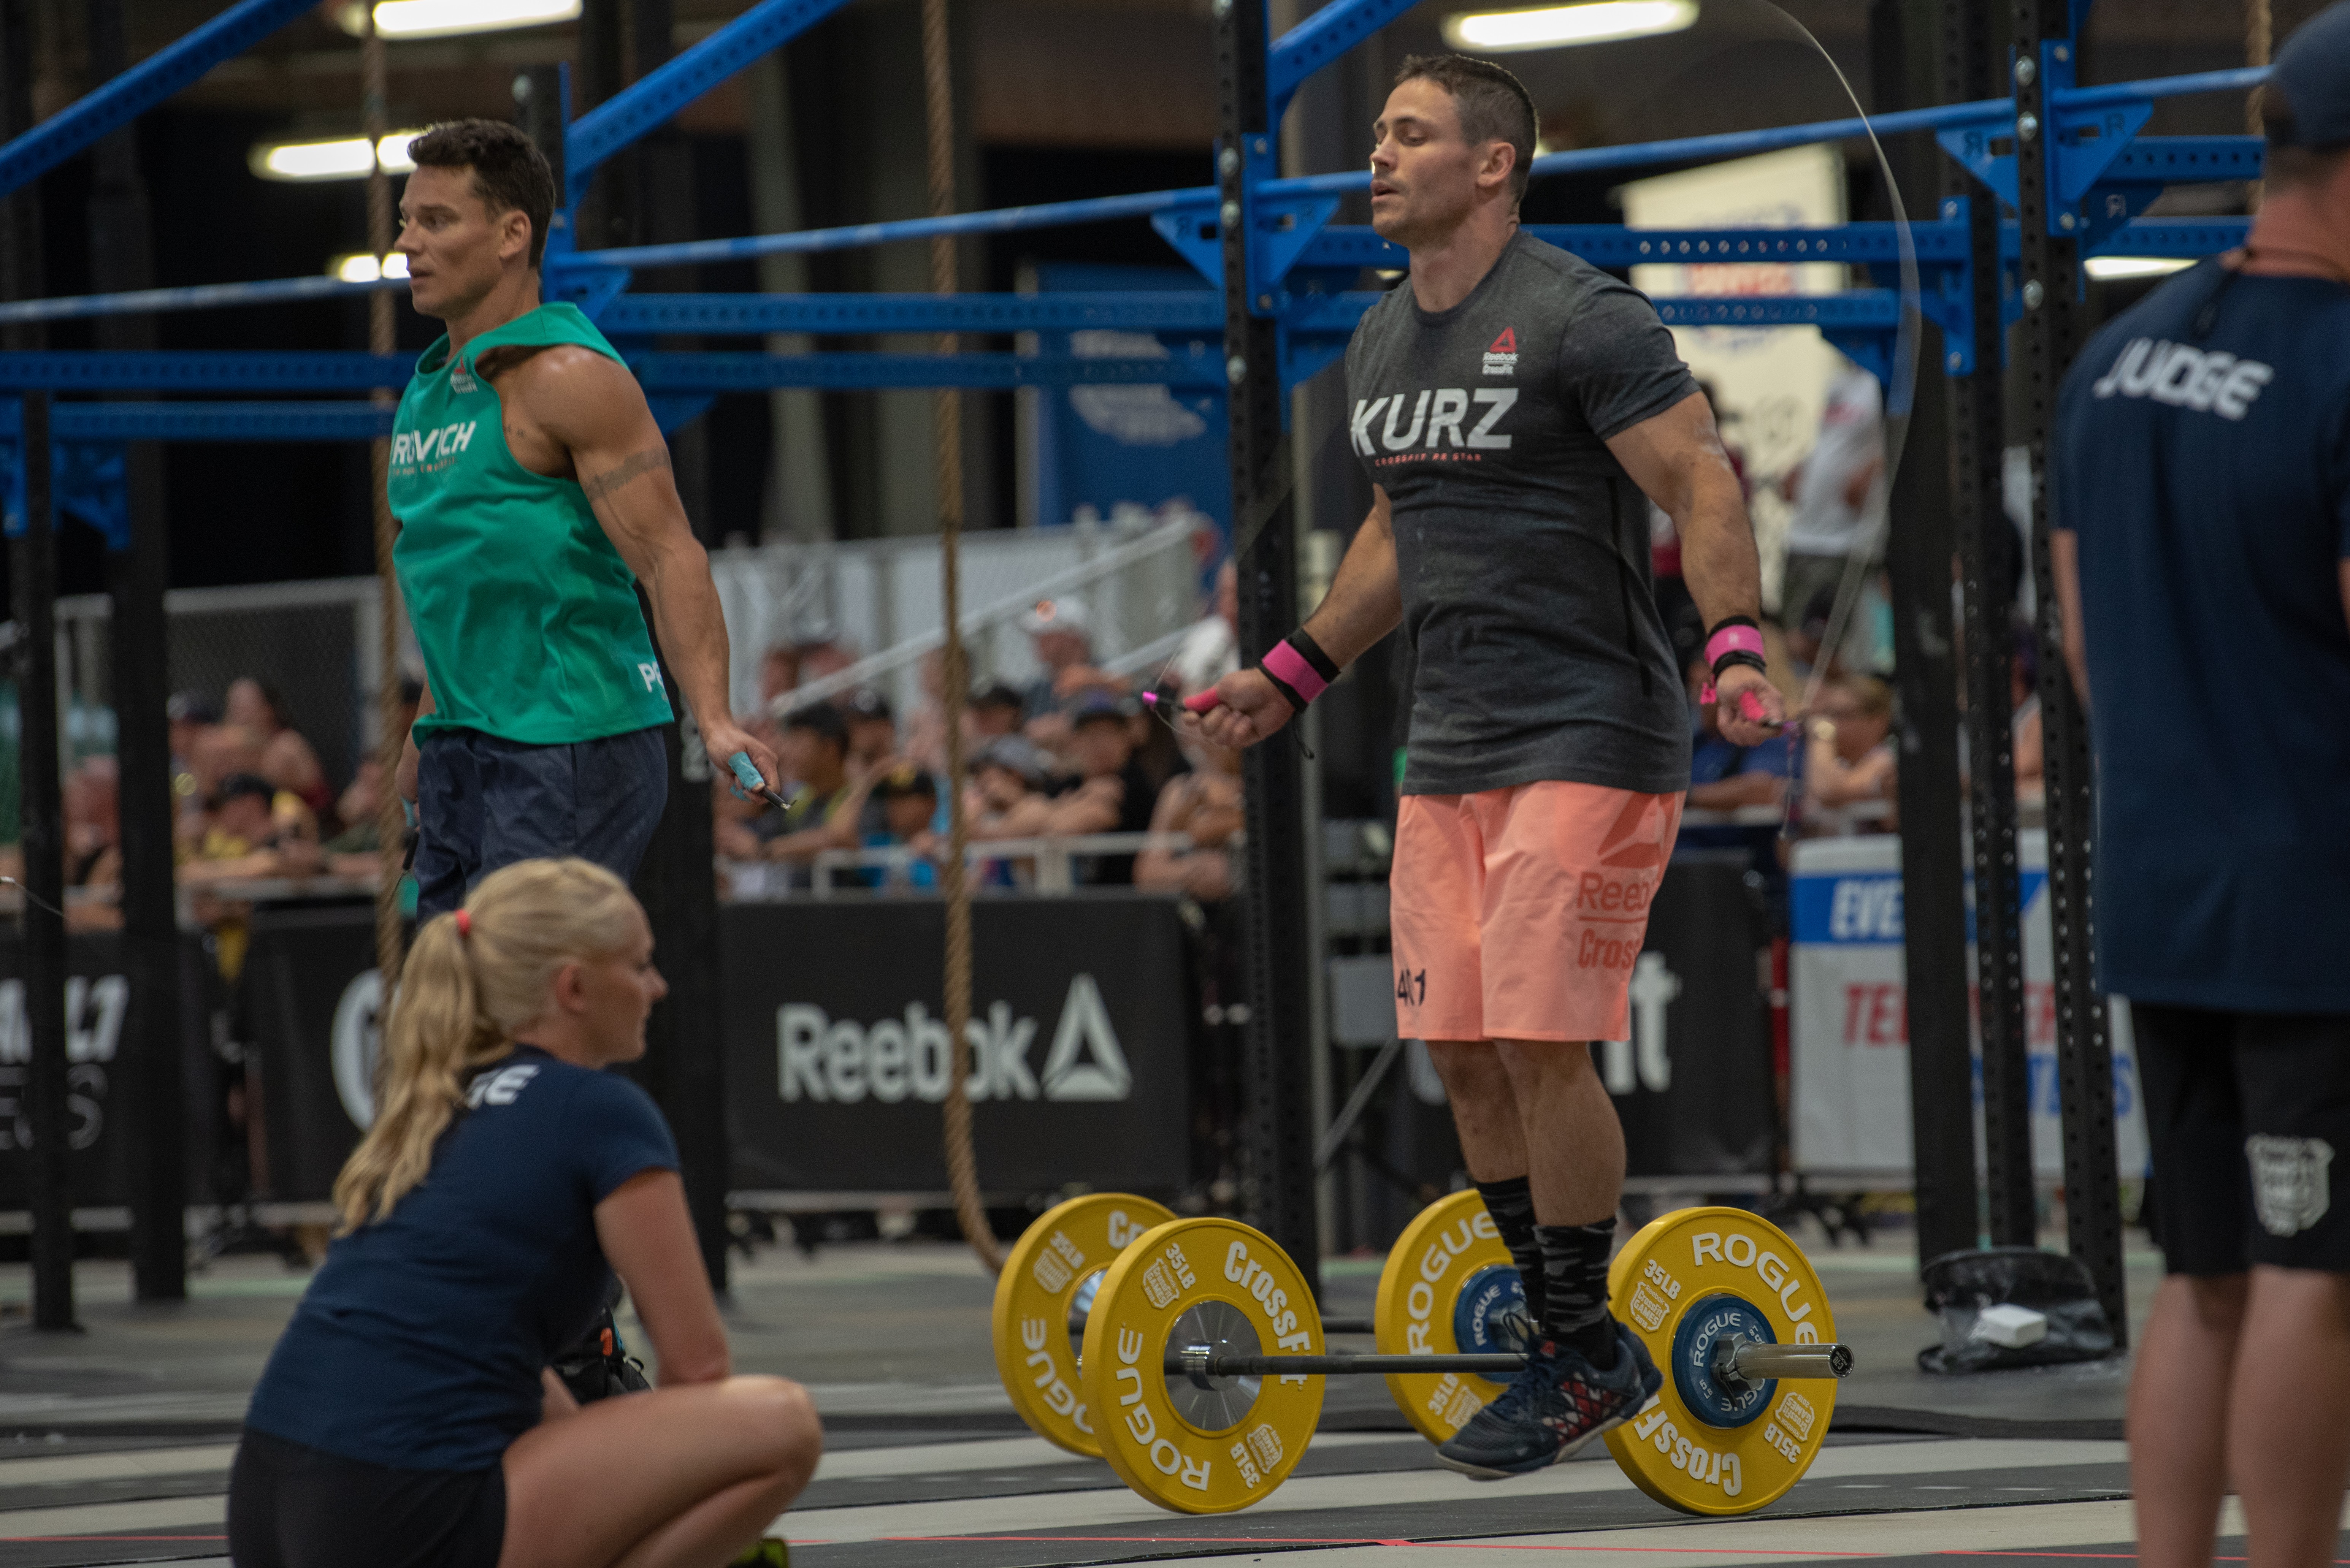 Diplomat Sygeplejeskole menneskemængde Soldiers vie in survival of the fittest at 2019 CrossFit Games | Article |  The United States Army